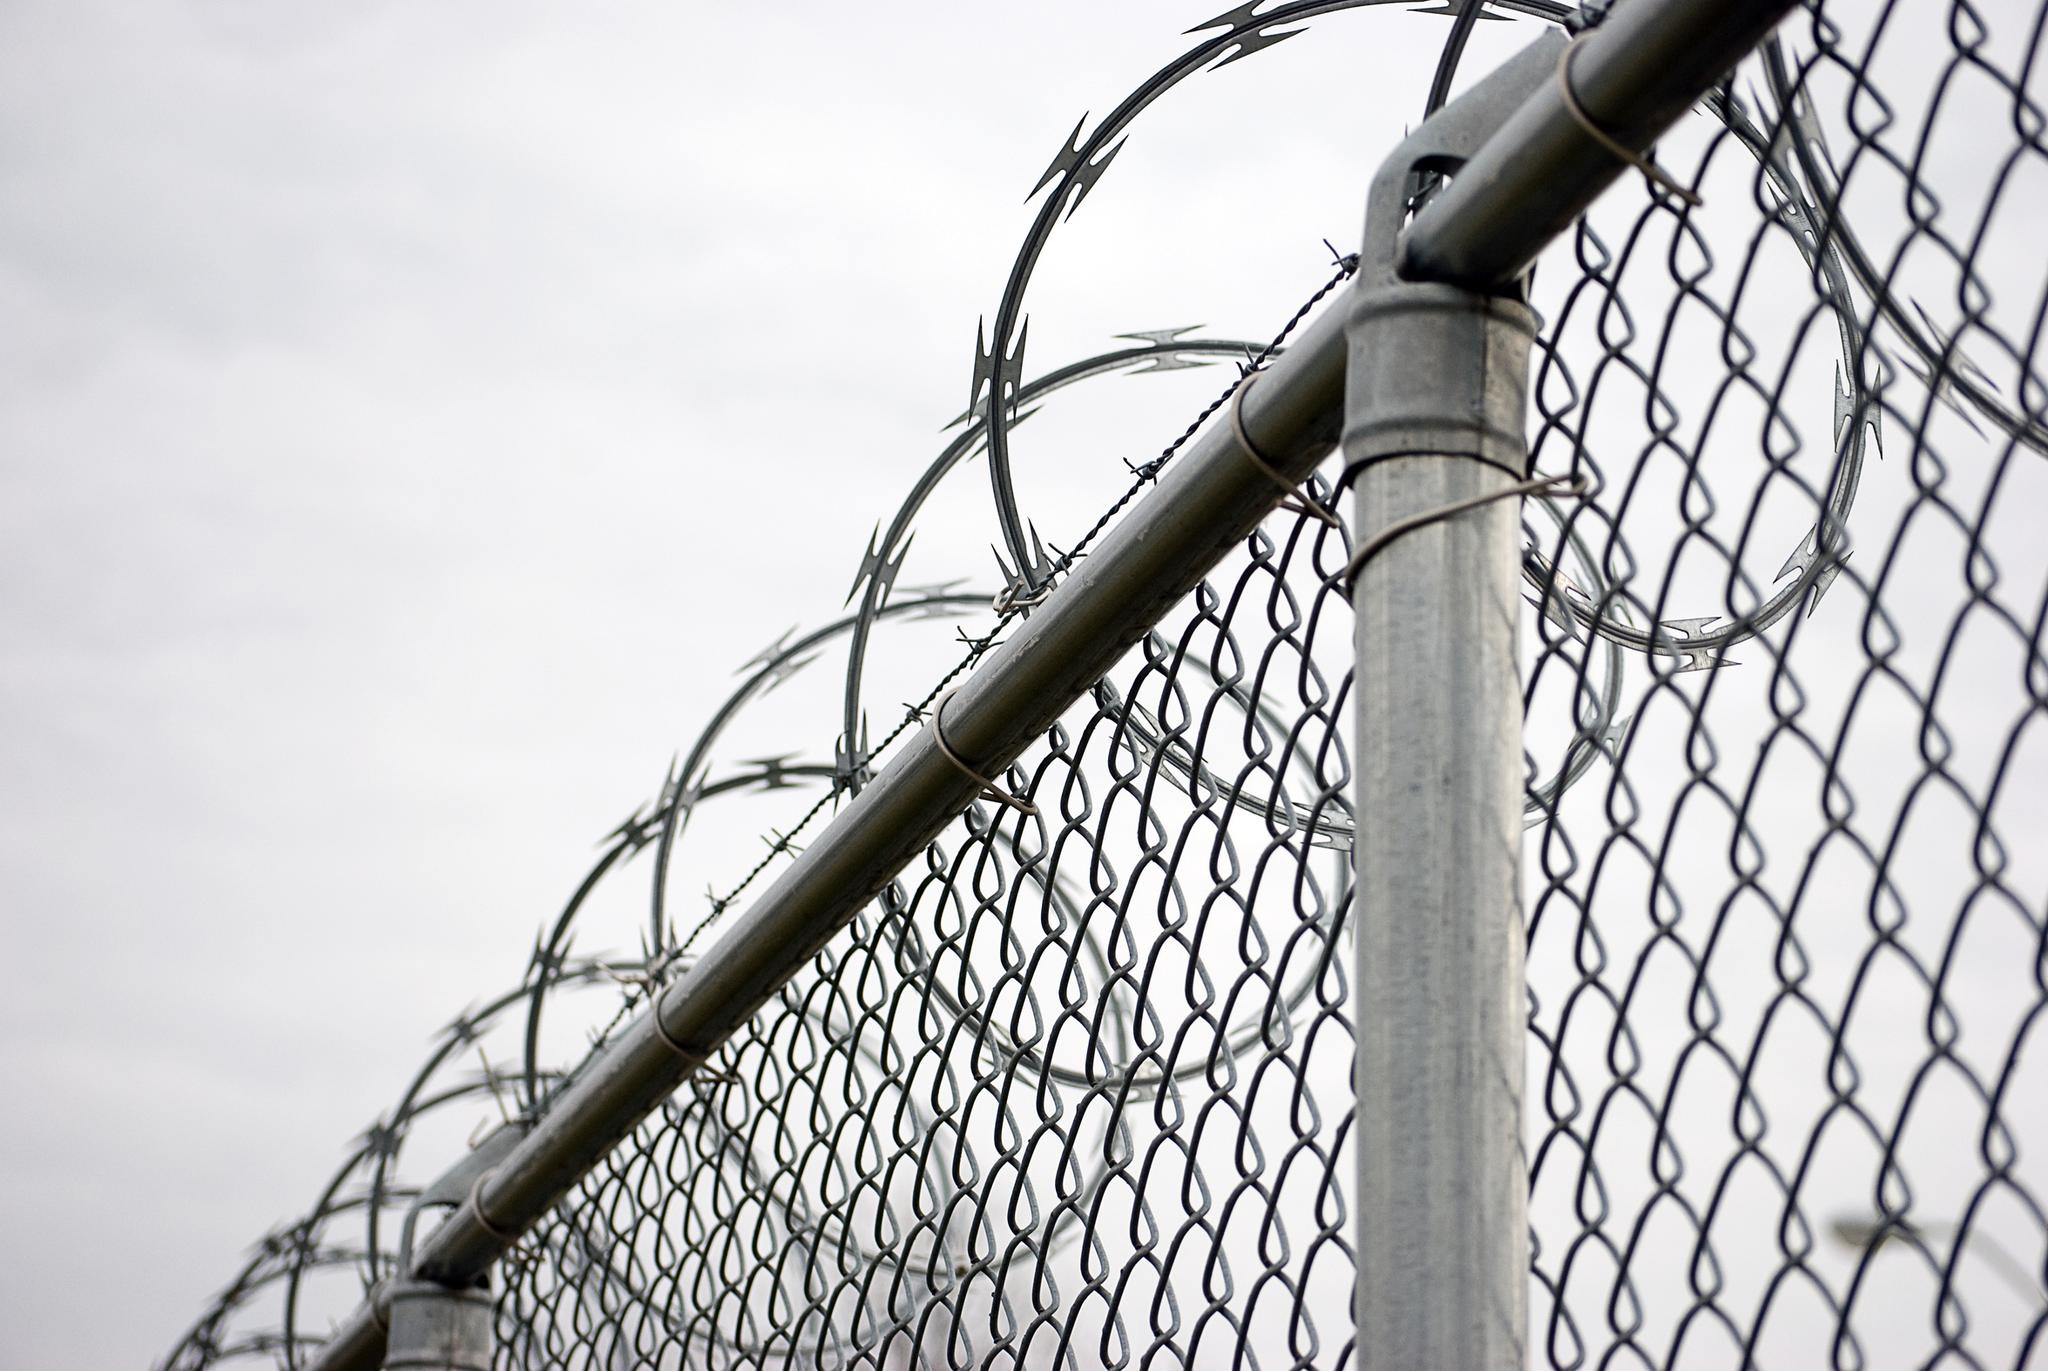 Chain link fence with razor wire on top